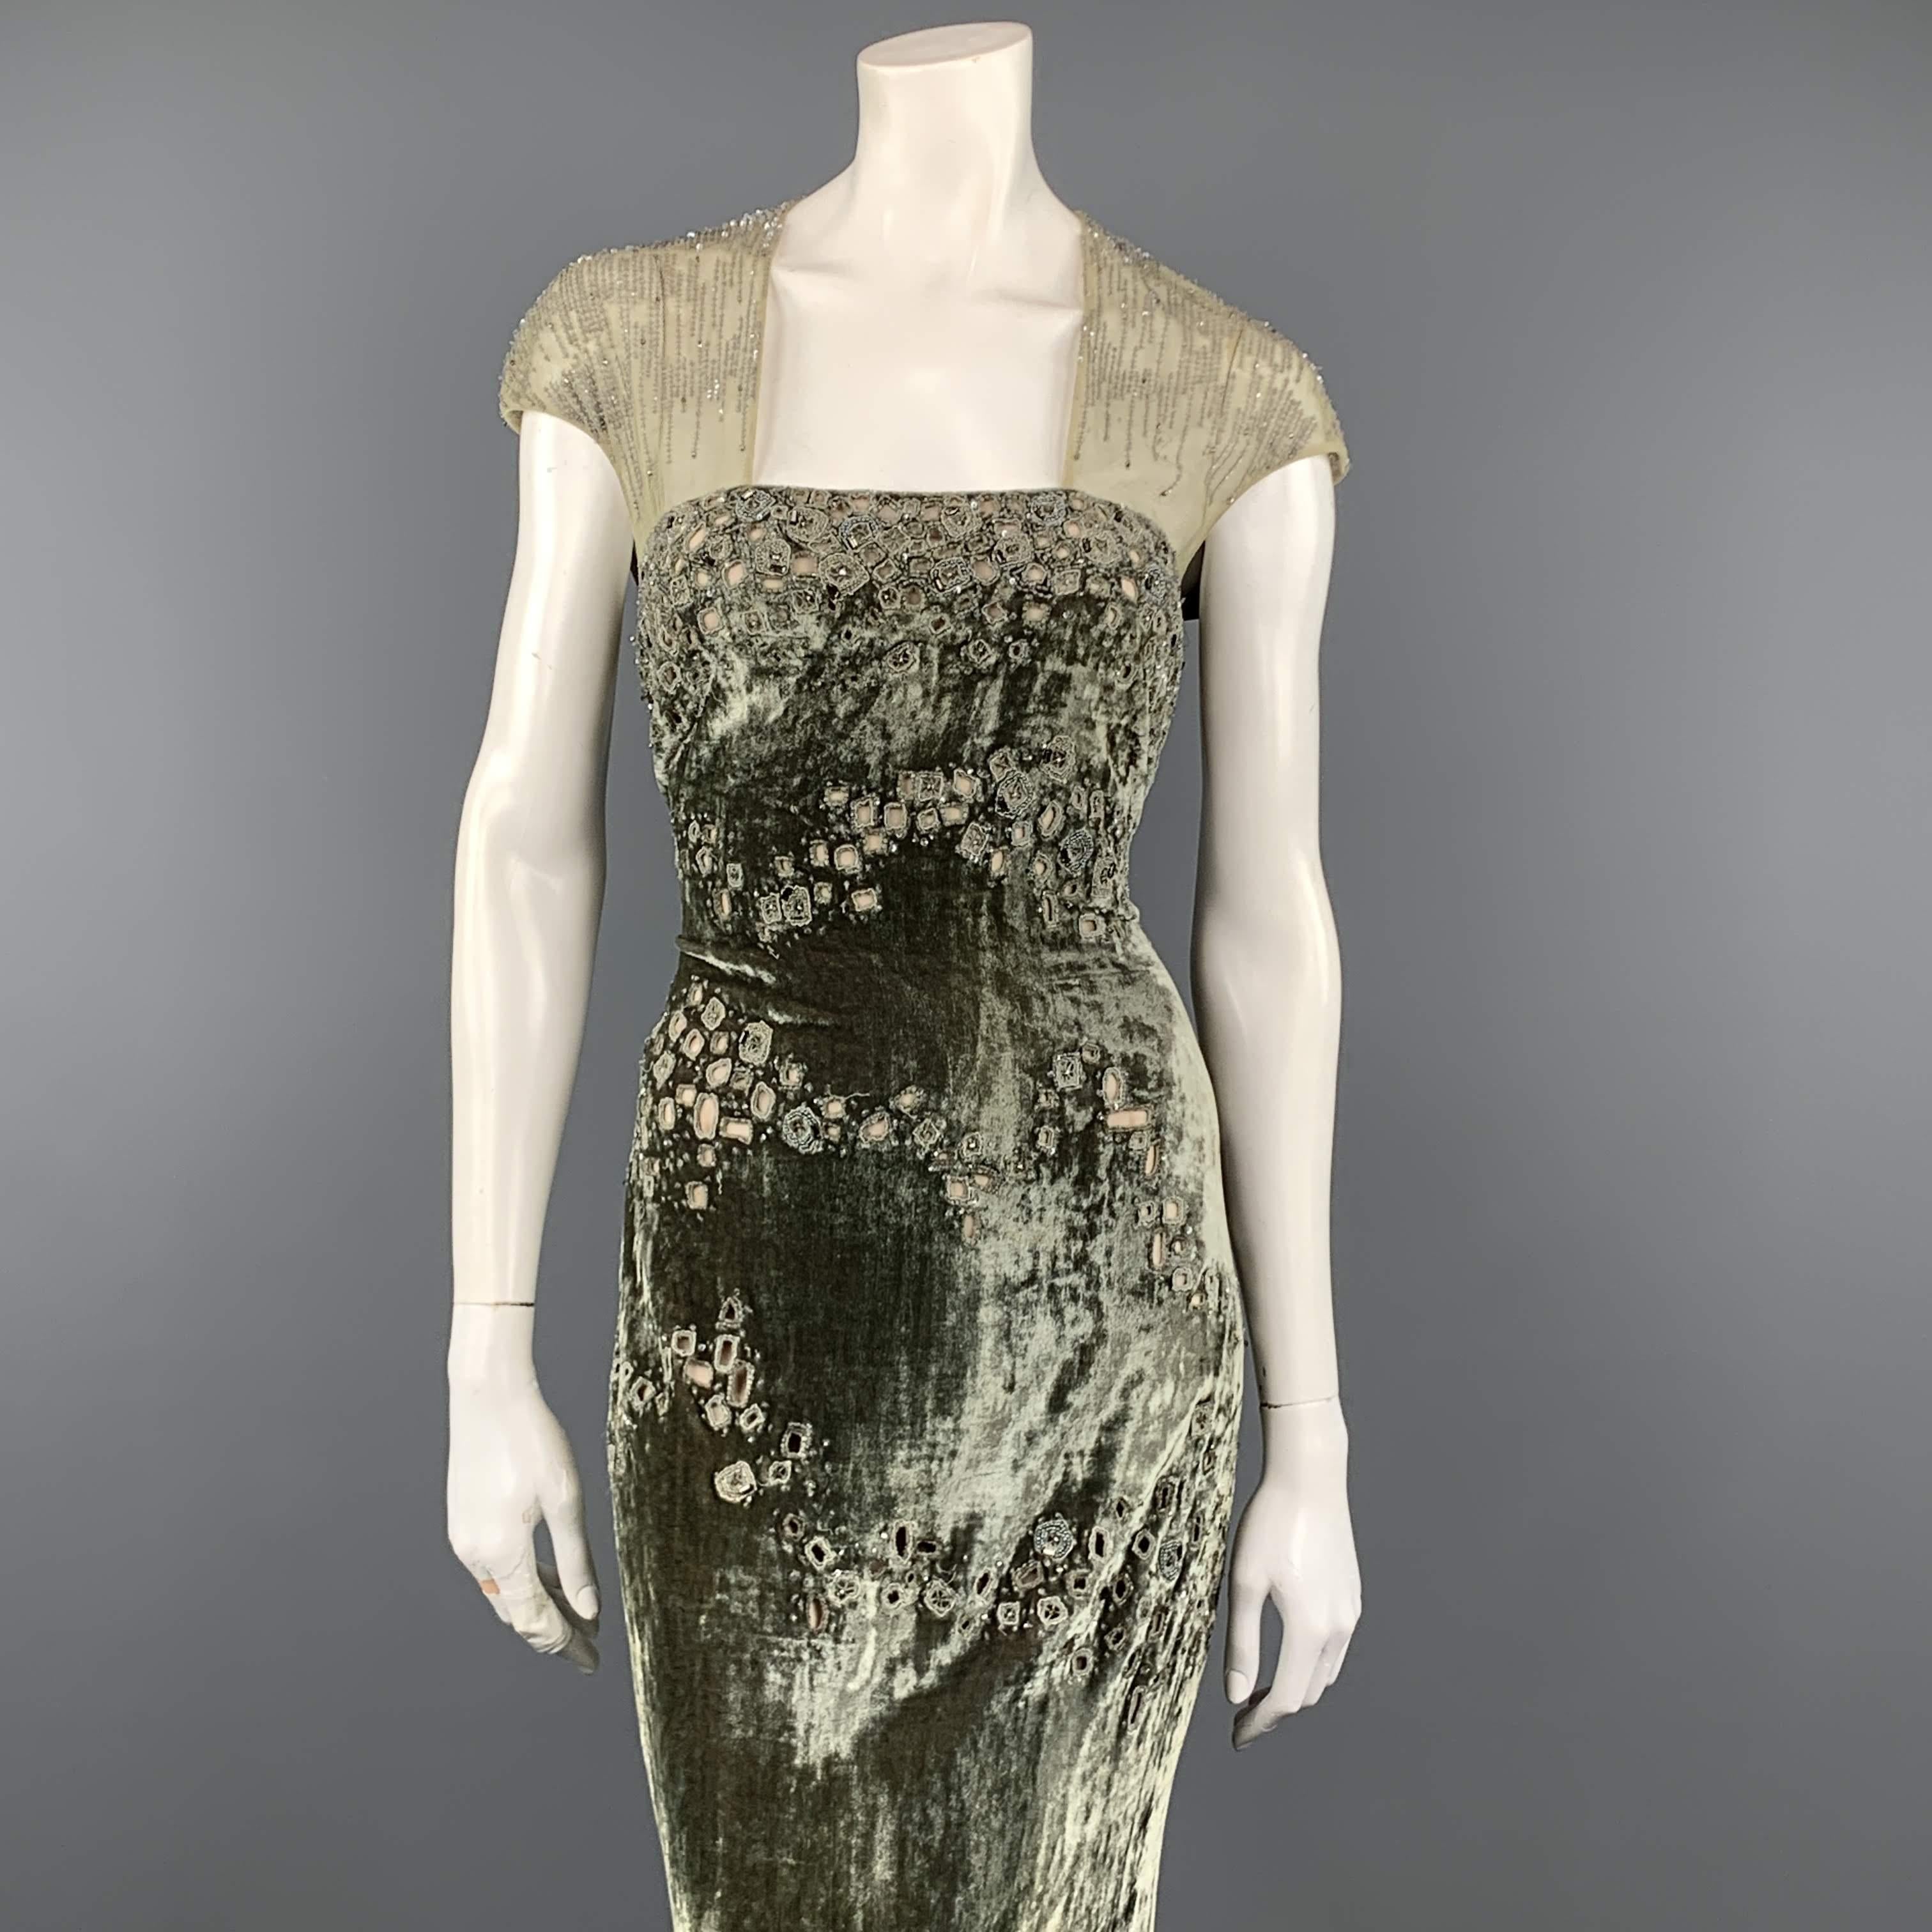 BADGLEY MISCHKA evening gown comes in moss green textured velvet with beaded cutouts throughout, a sheath silhouette body, beige chiffon liner, and beaded cap tulle cap sleeve top with button back. Tear in bottom of lining. As-is. Otherwise